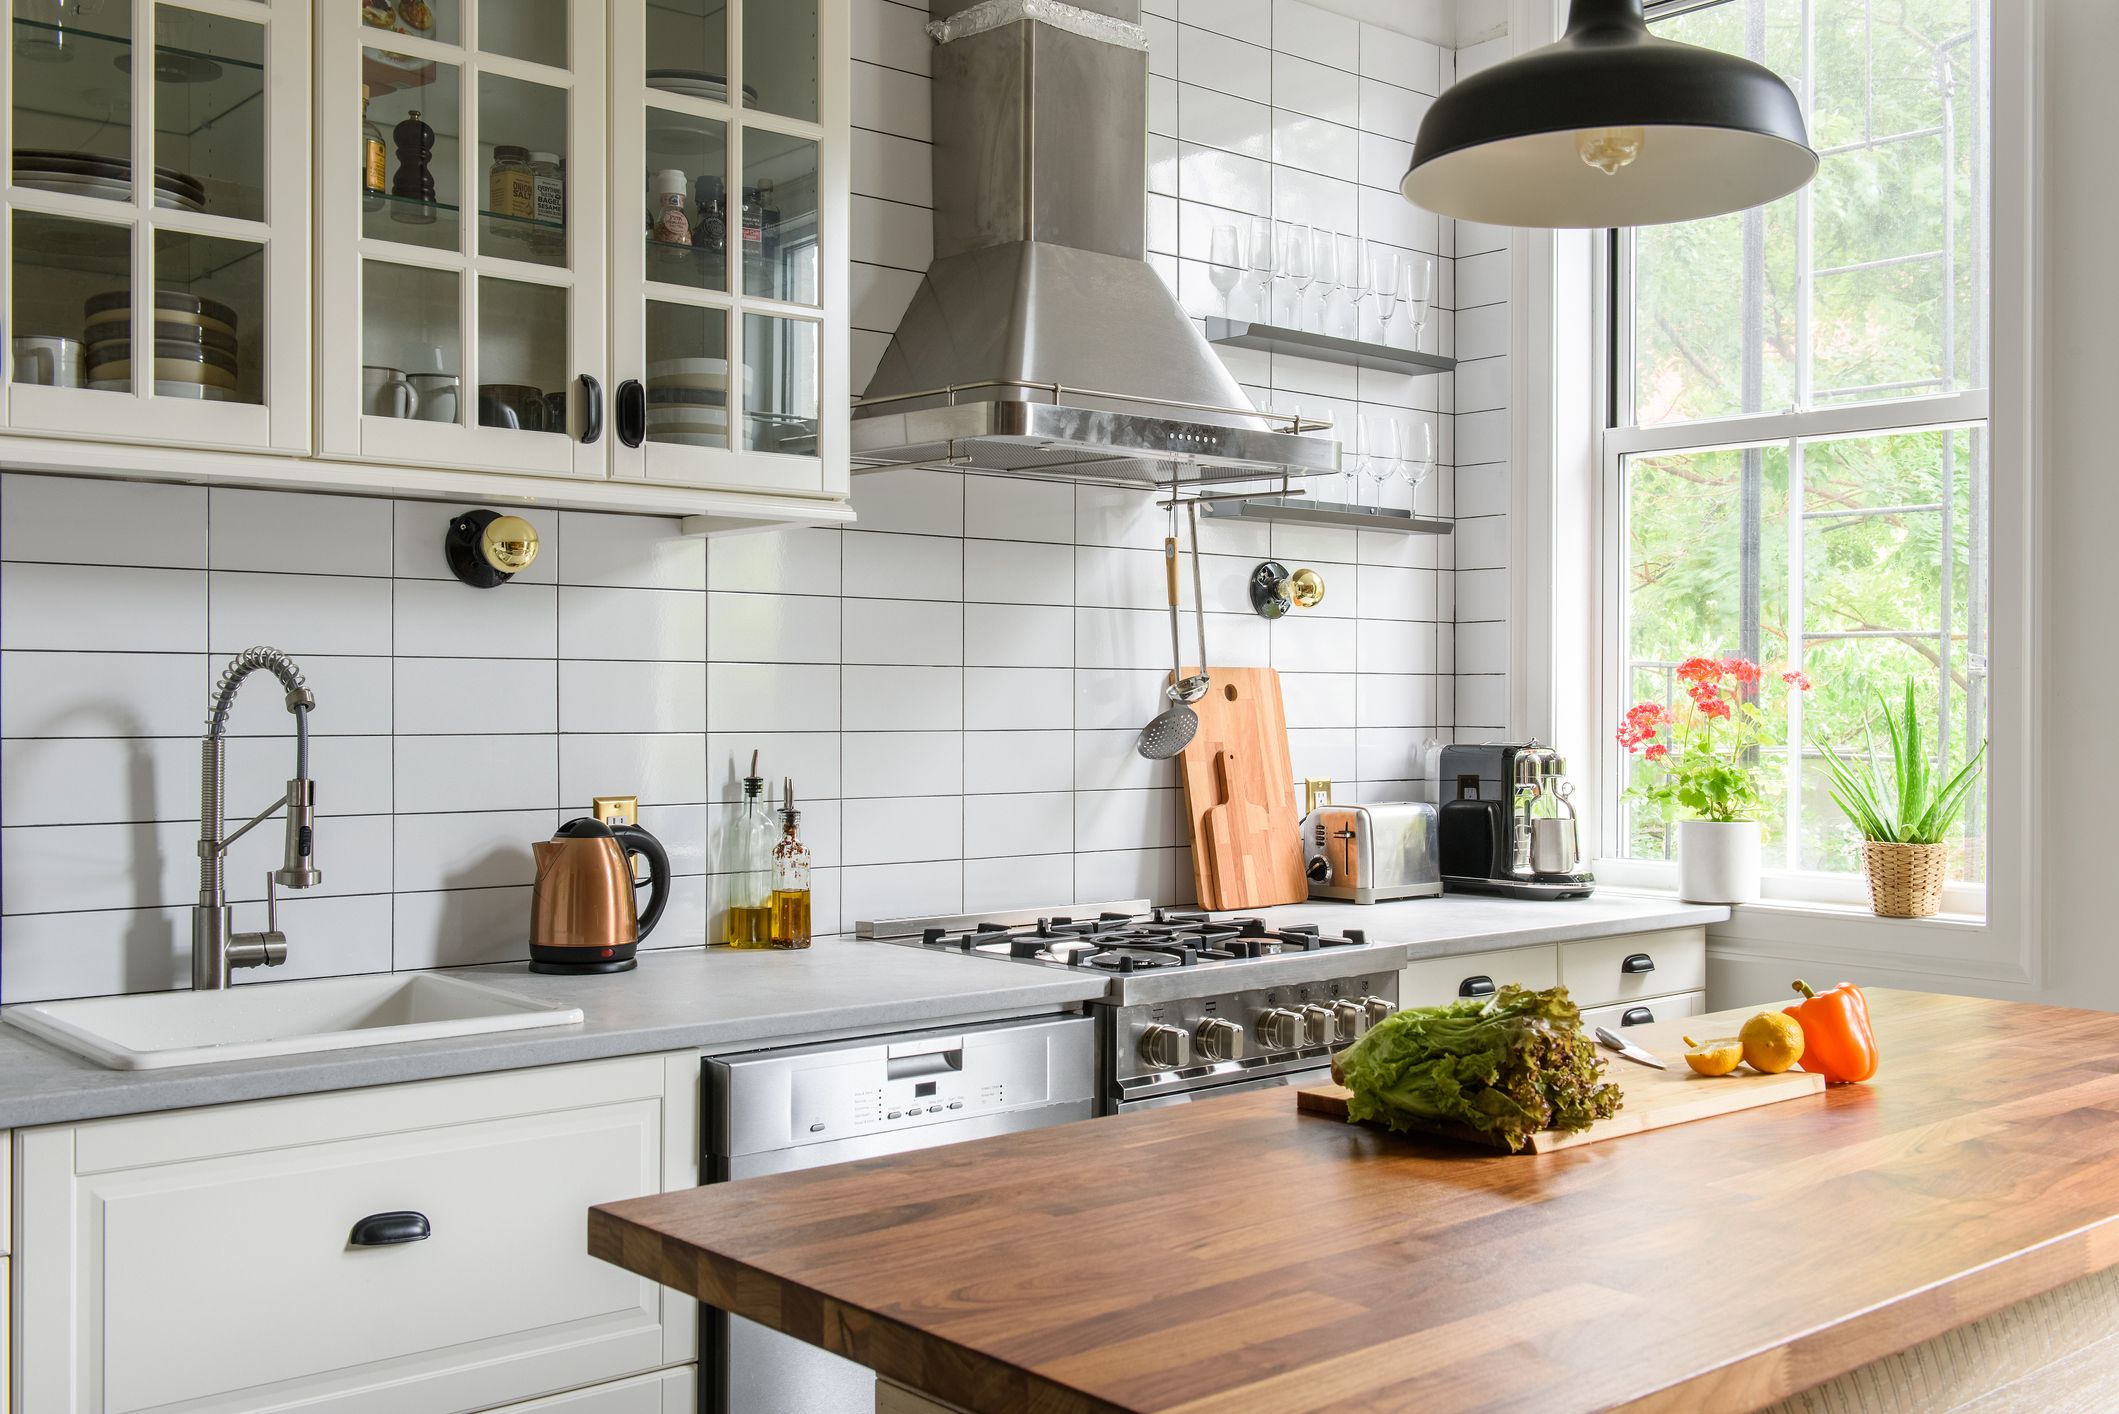 20 things people regret most about their kitchen design – and how ...